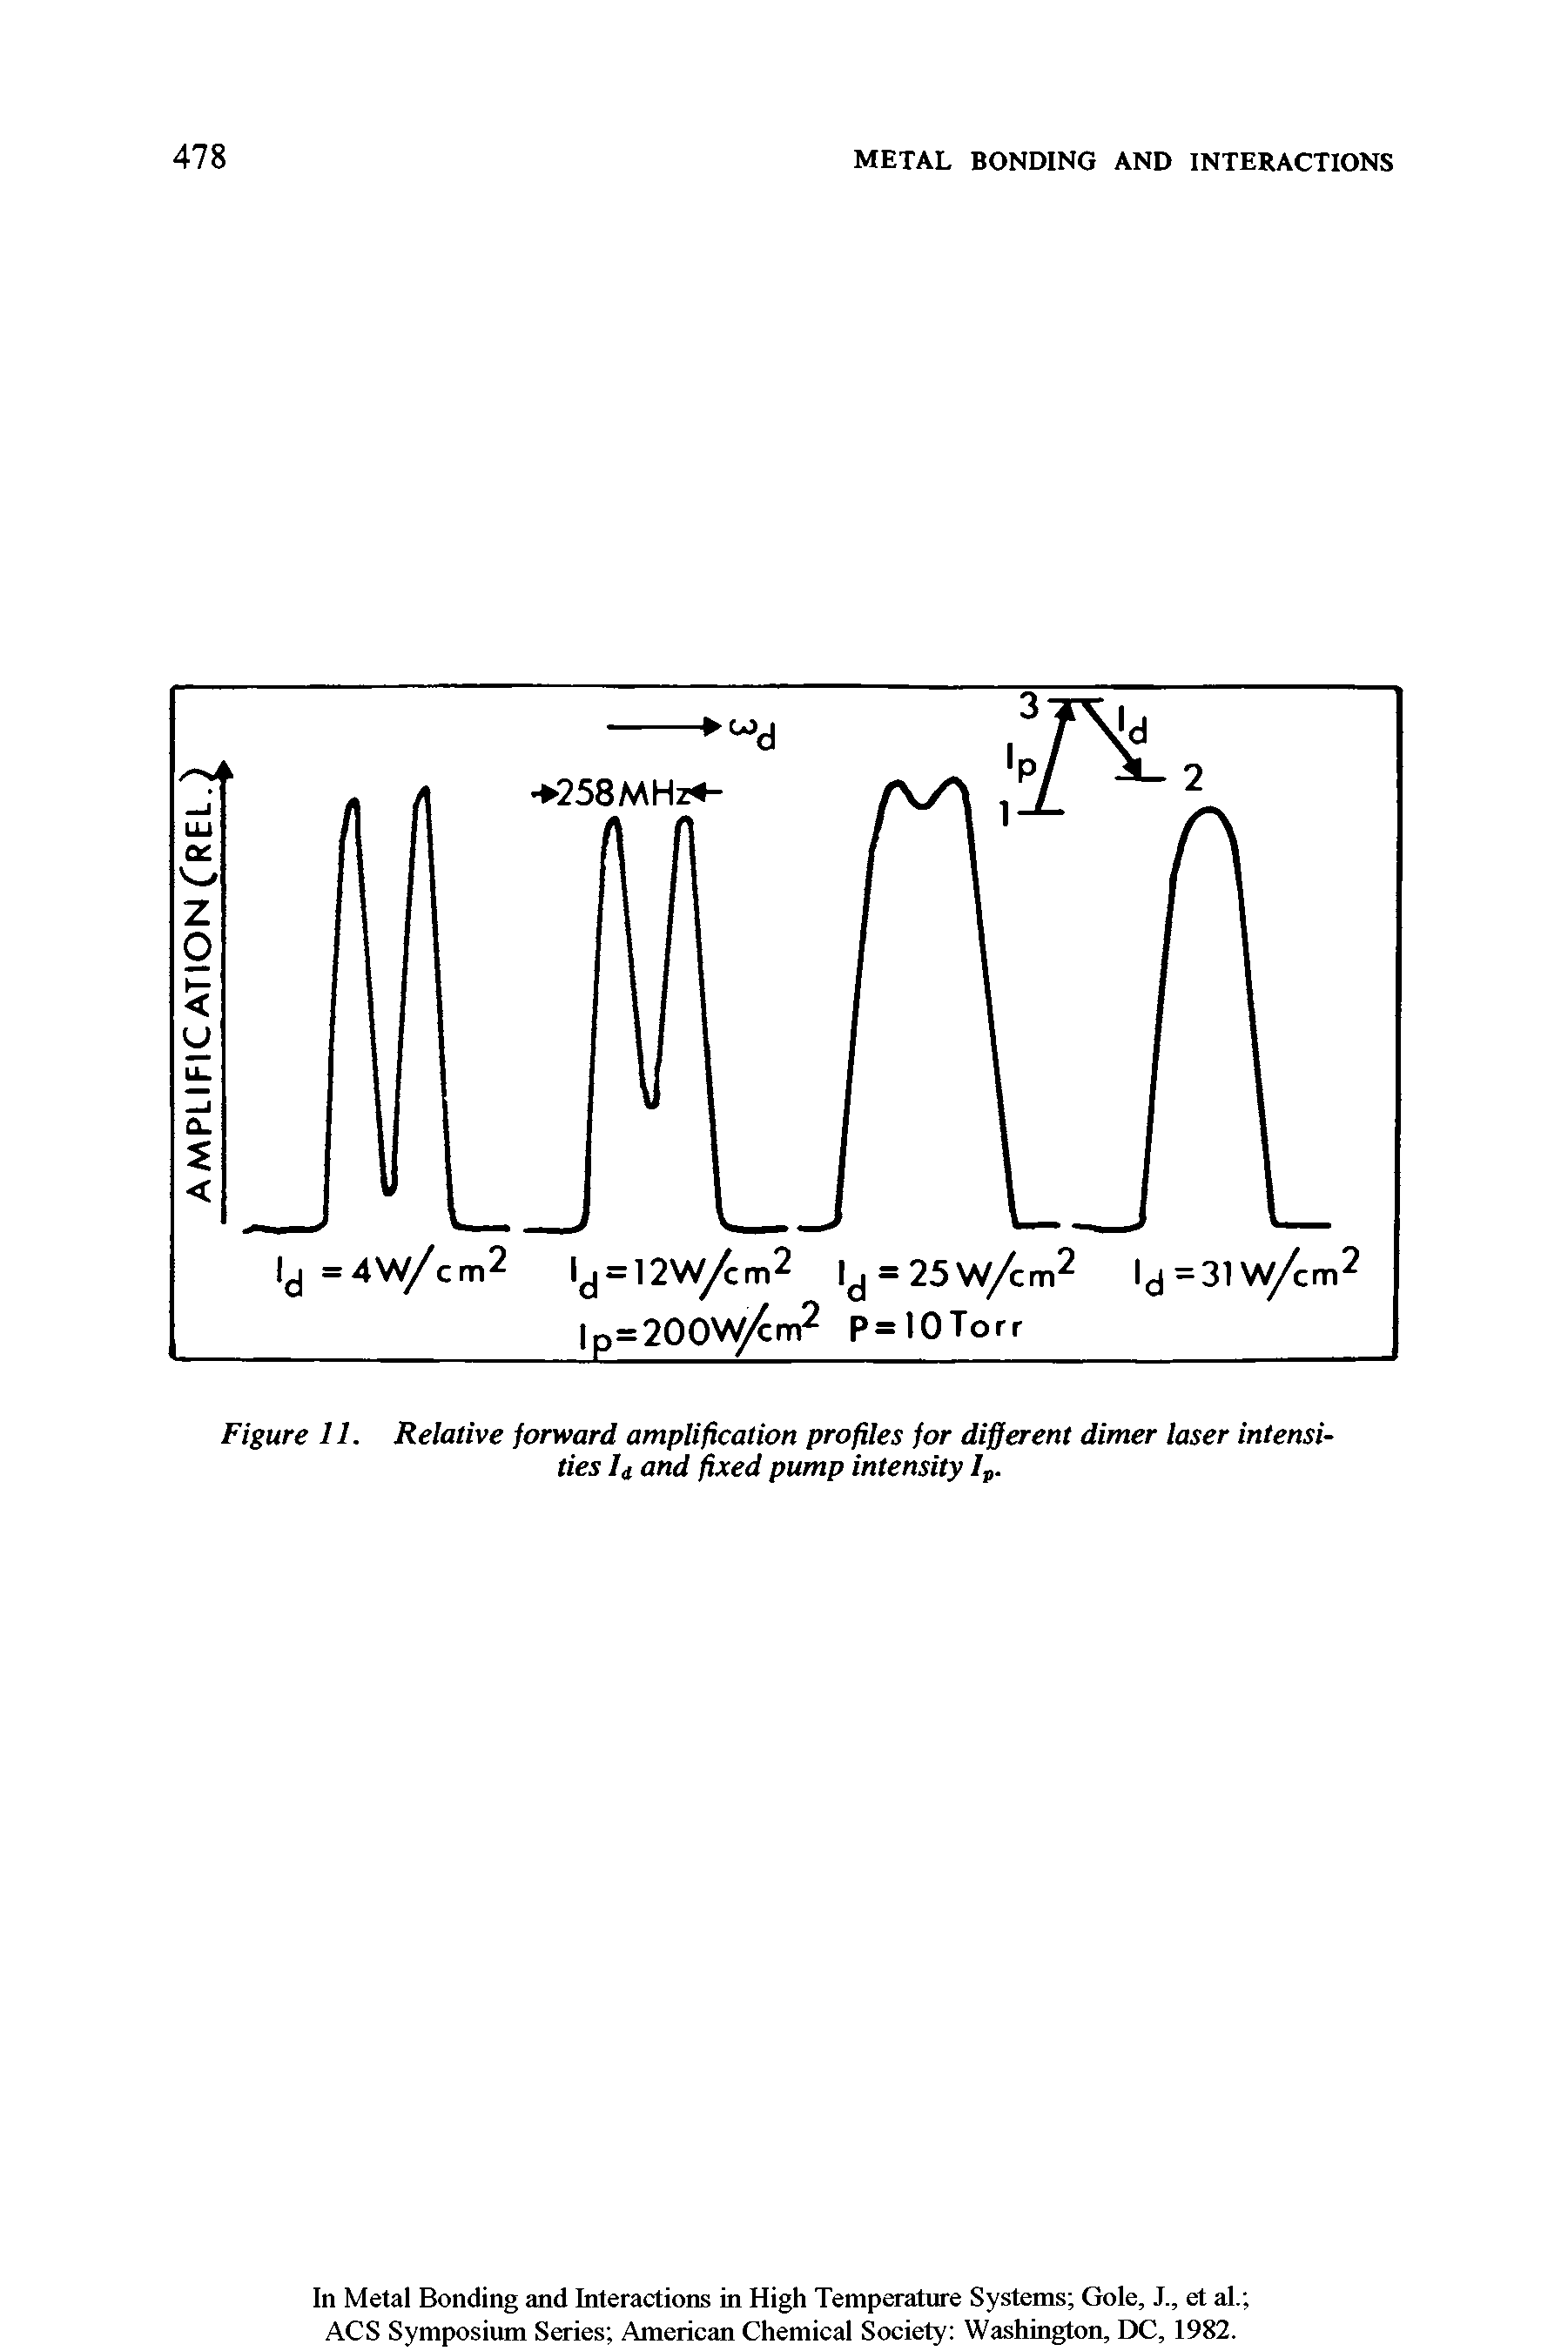 Figure 11. Relative forward amplification profiles for different dimer laser intensities li and fixed pump intensity Ip.